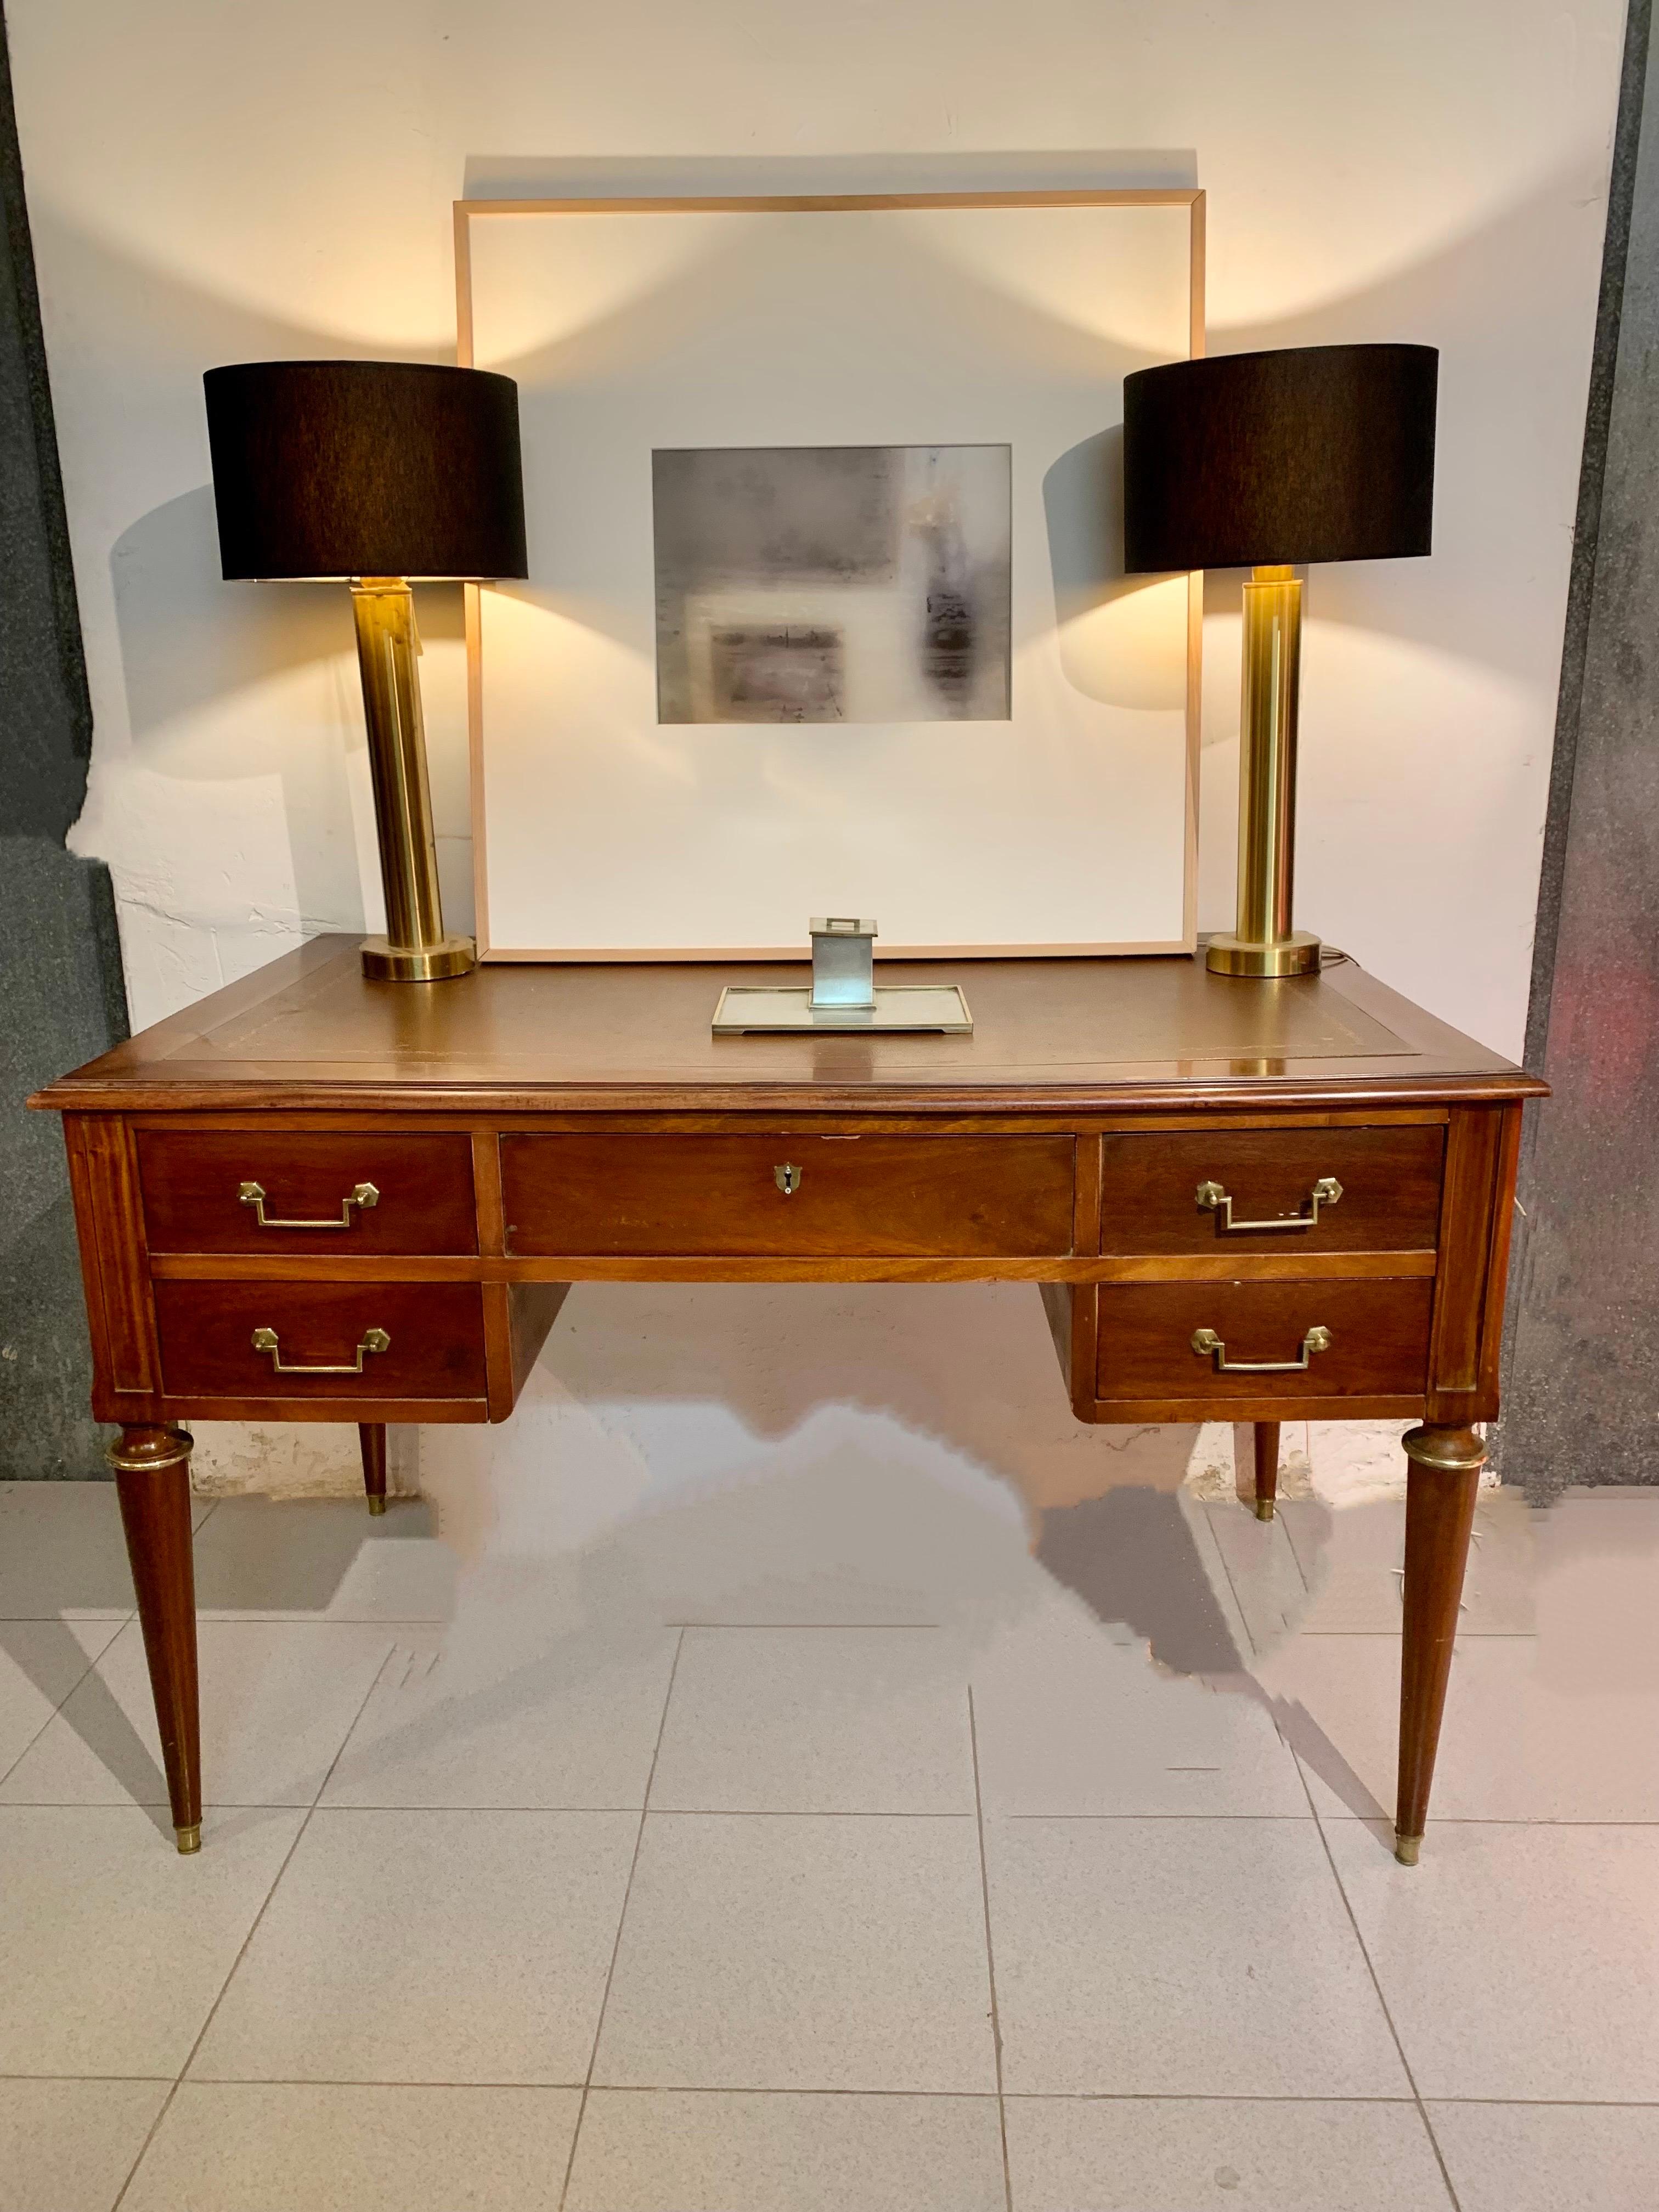 Mid-20th century Louis XVI style Spanish cherry wood writing desk features a brown leather top edged with gold filigree. It has five drawers, the main one with a brass keyhole escutcheon, the other four drawers have gilt bronze handles. Shields are